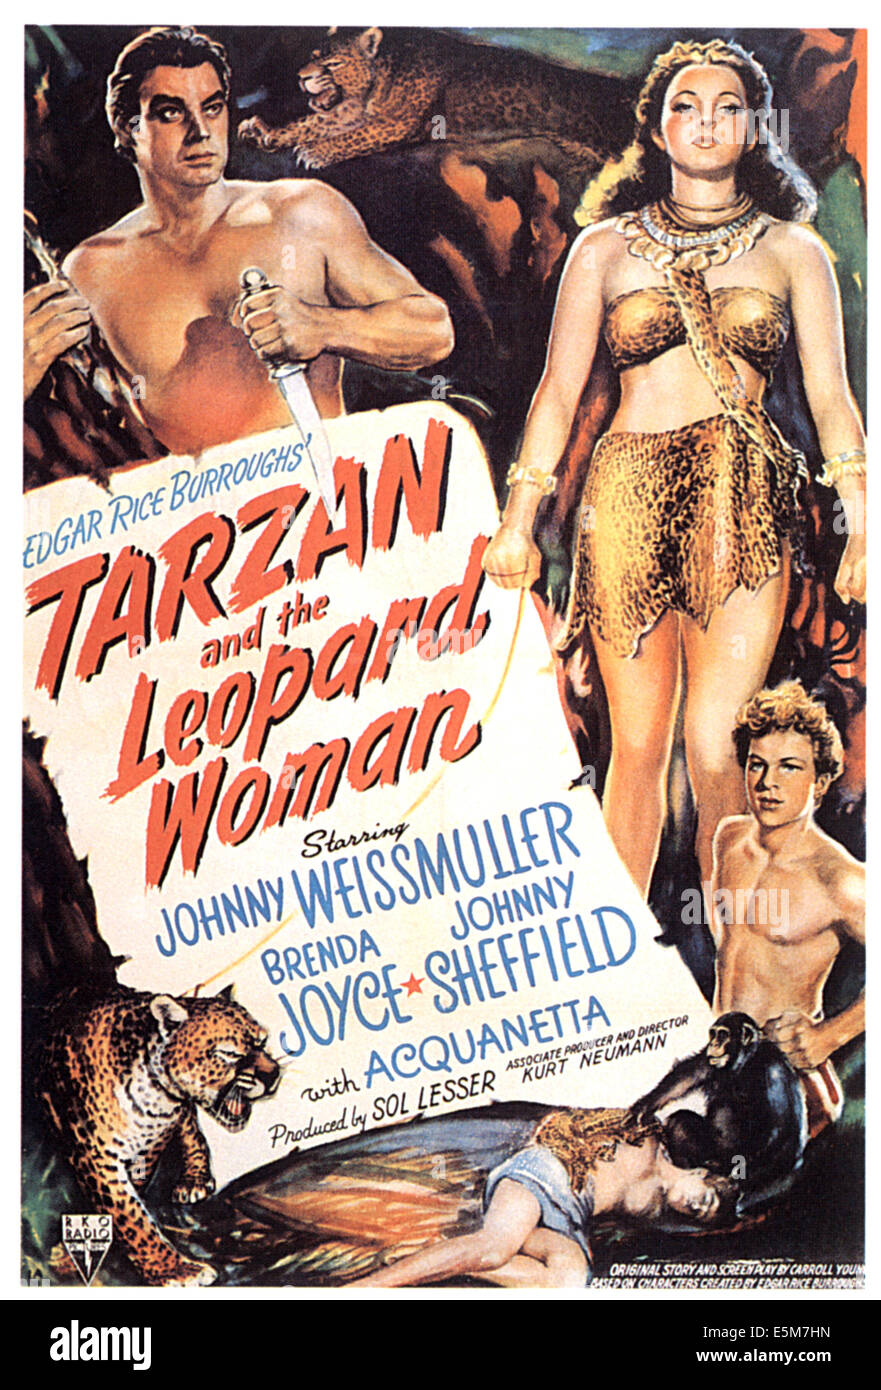 TARZAN AND THE LEOPARD WOMAN, Johnny Weissmuller, Acquanetta, Johnny Sheffield, 1946 Stock Photo